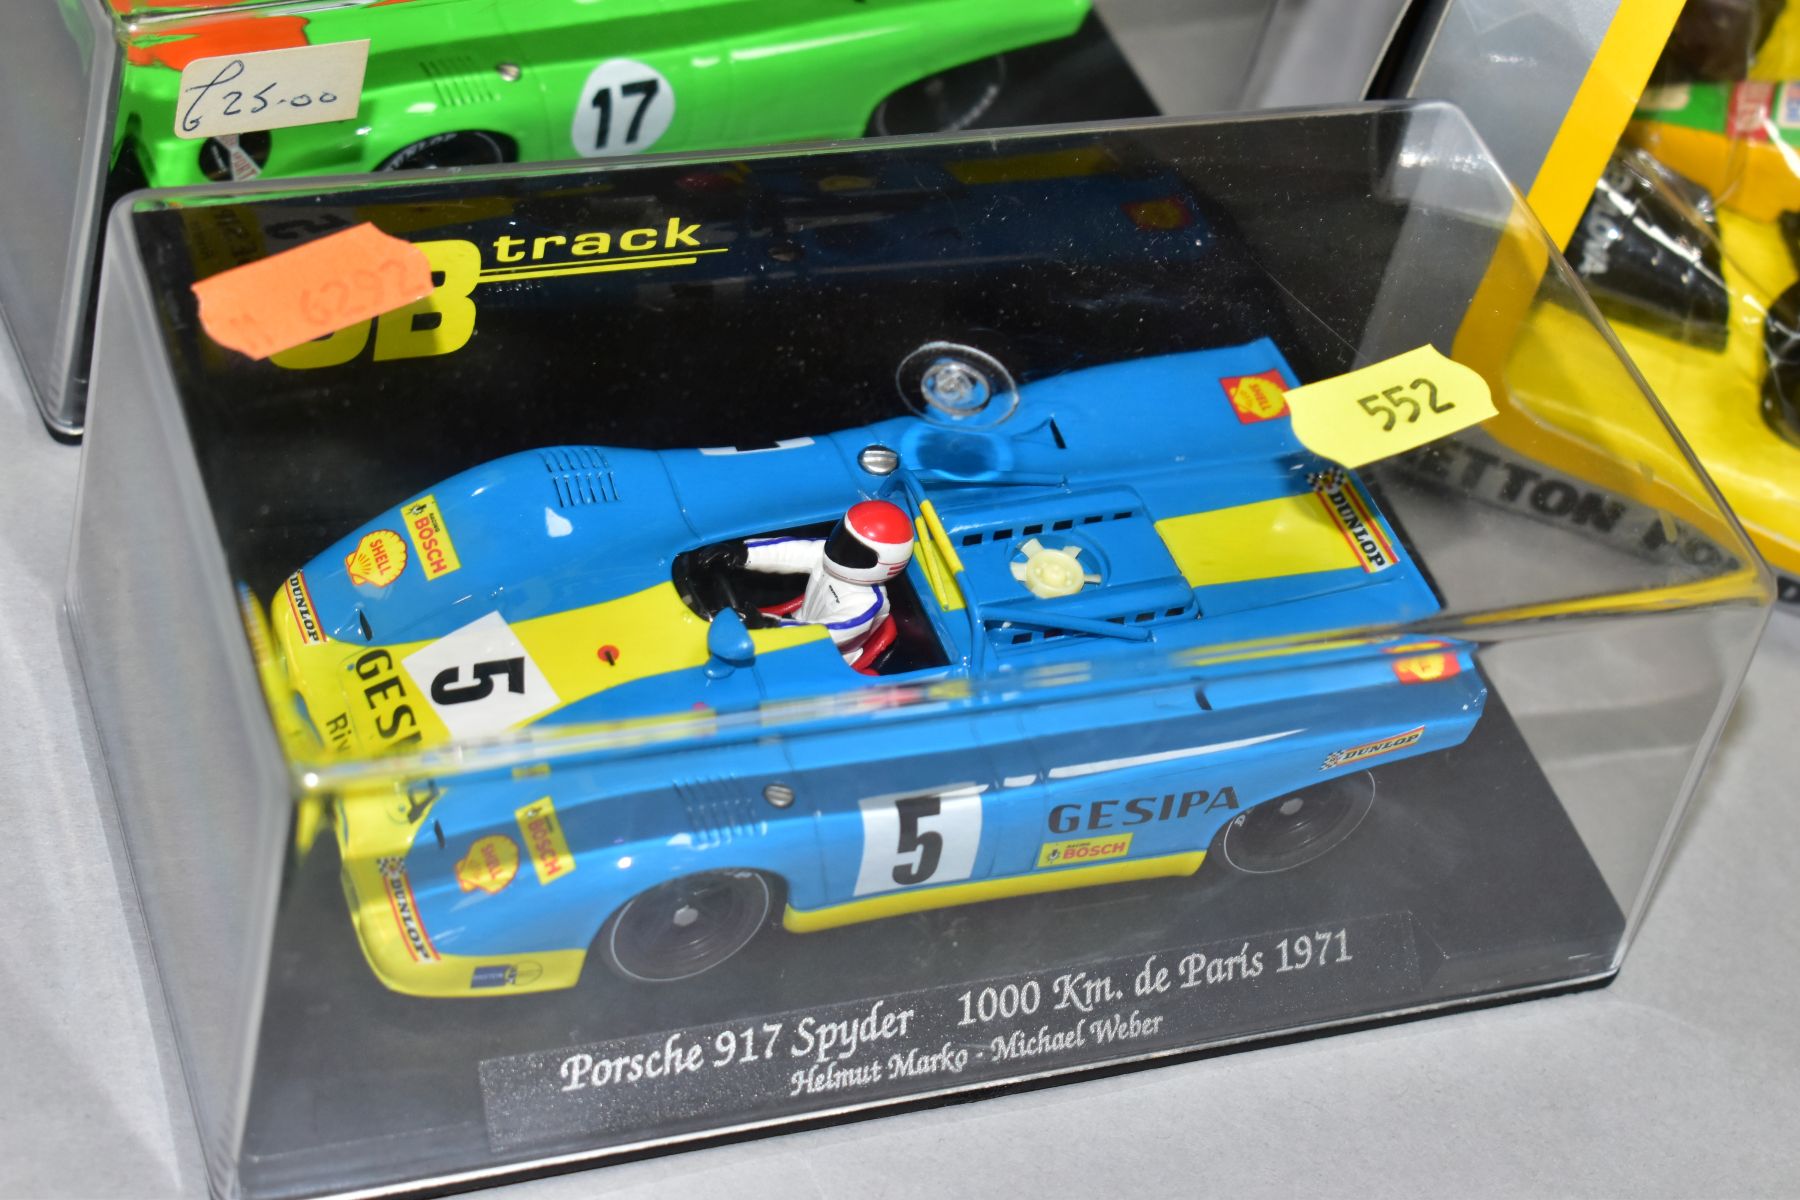 TWO BOXED GB TRACK PORSCHE 917 SPYDER SLOT RACIING CAR MODEL,S Interserie 1971, No.GB3 and 1000 KM - Image 3 of 4